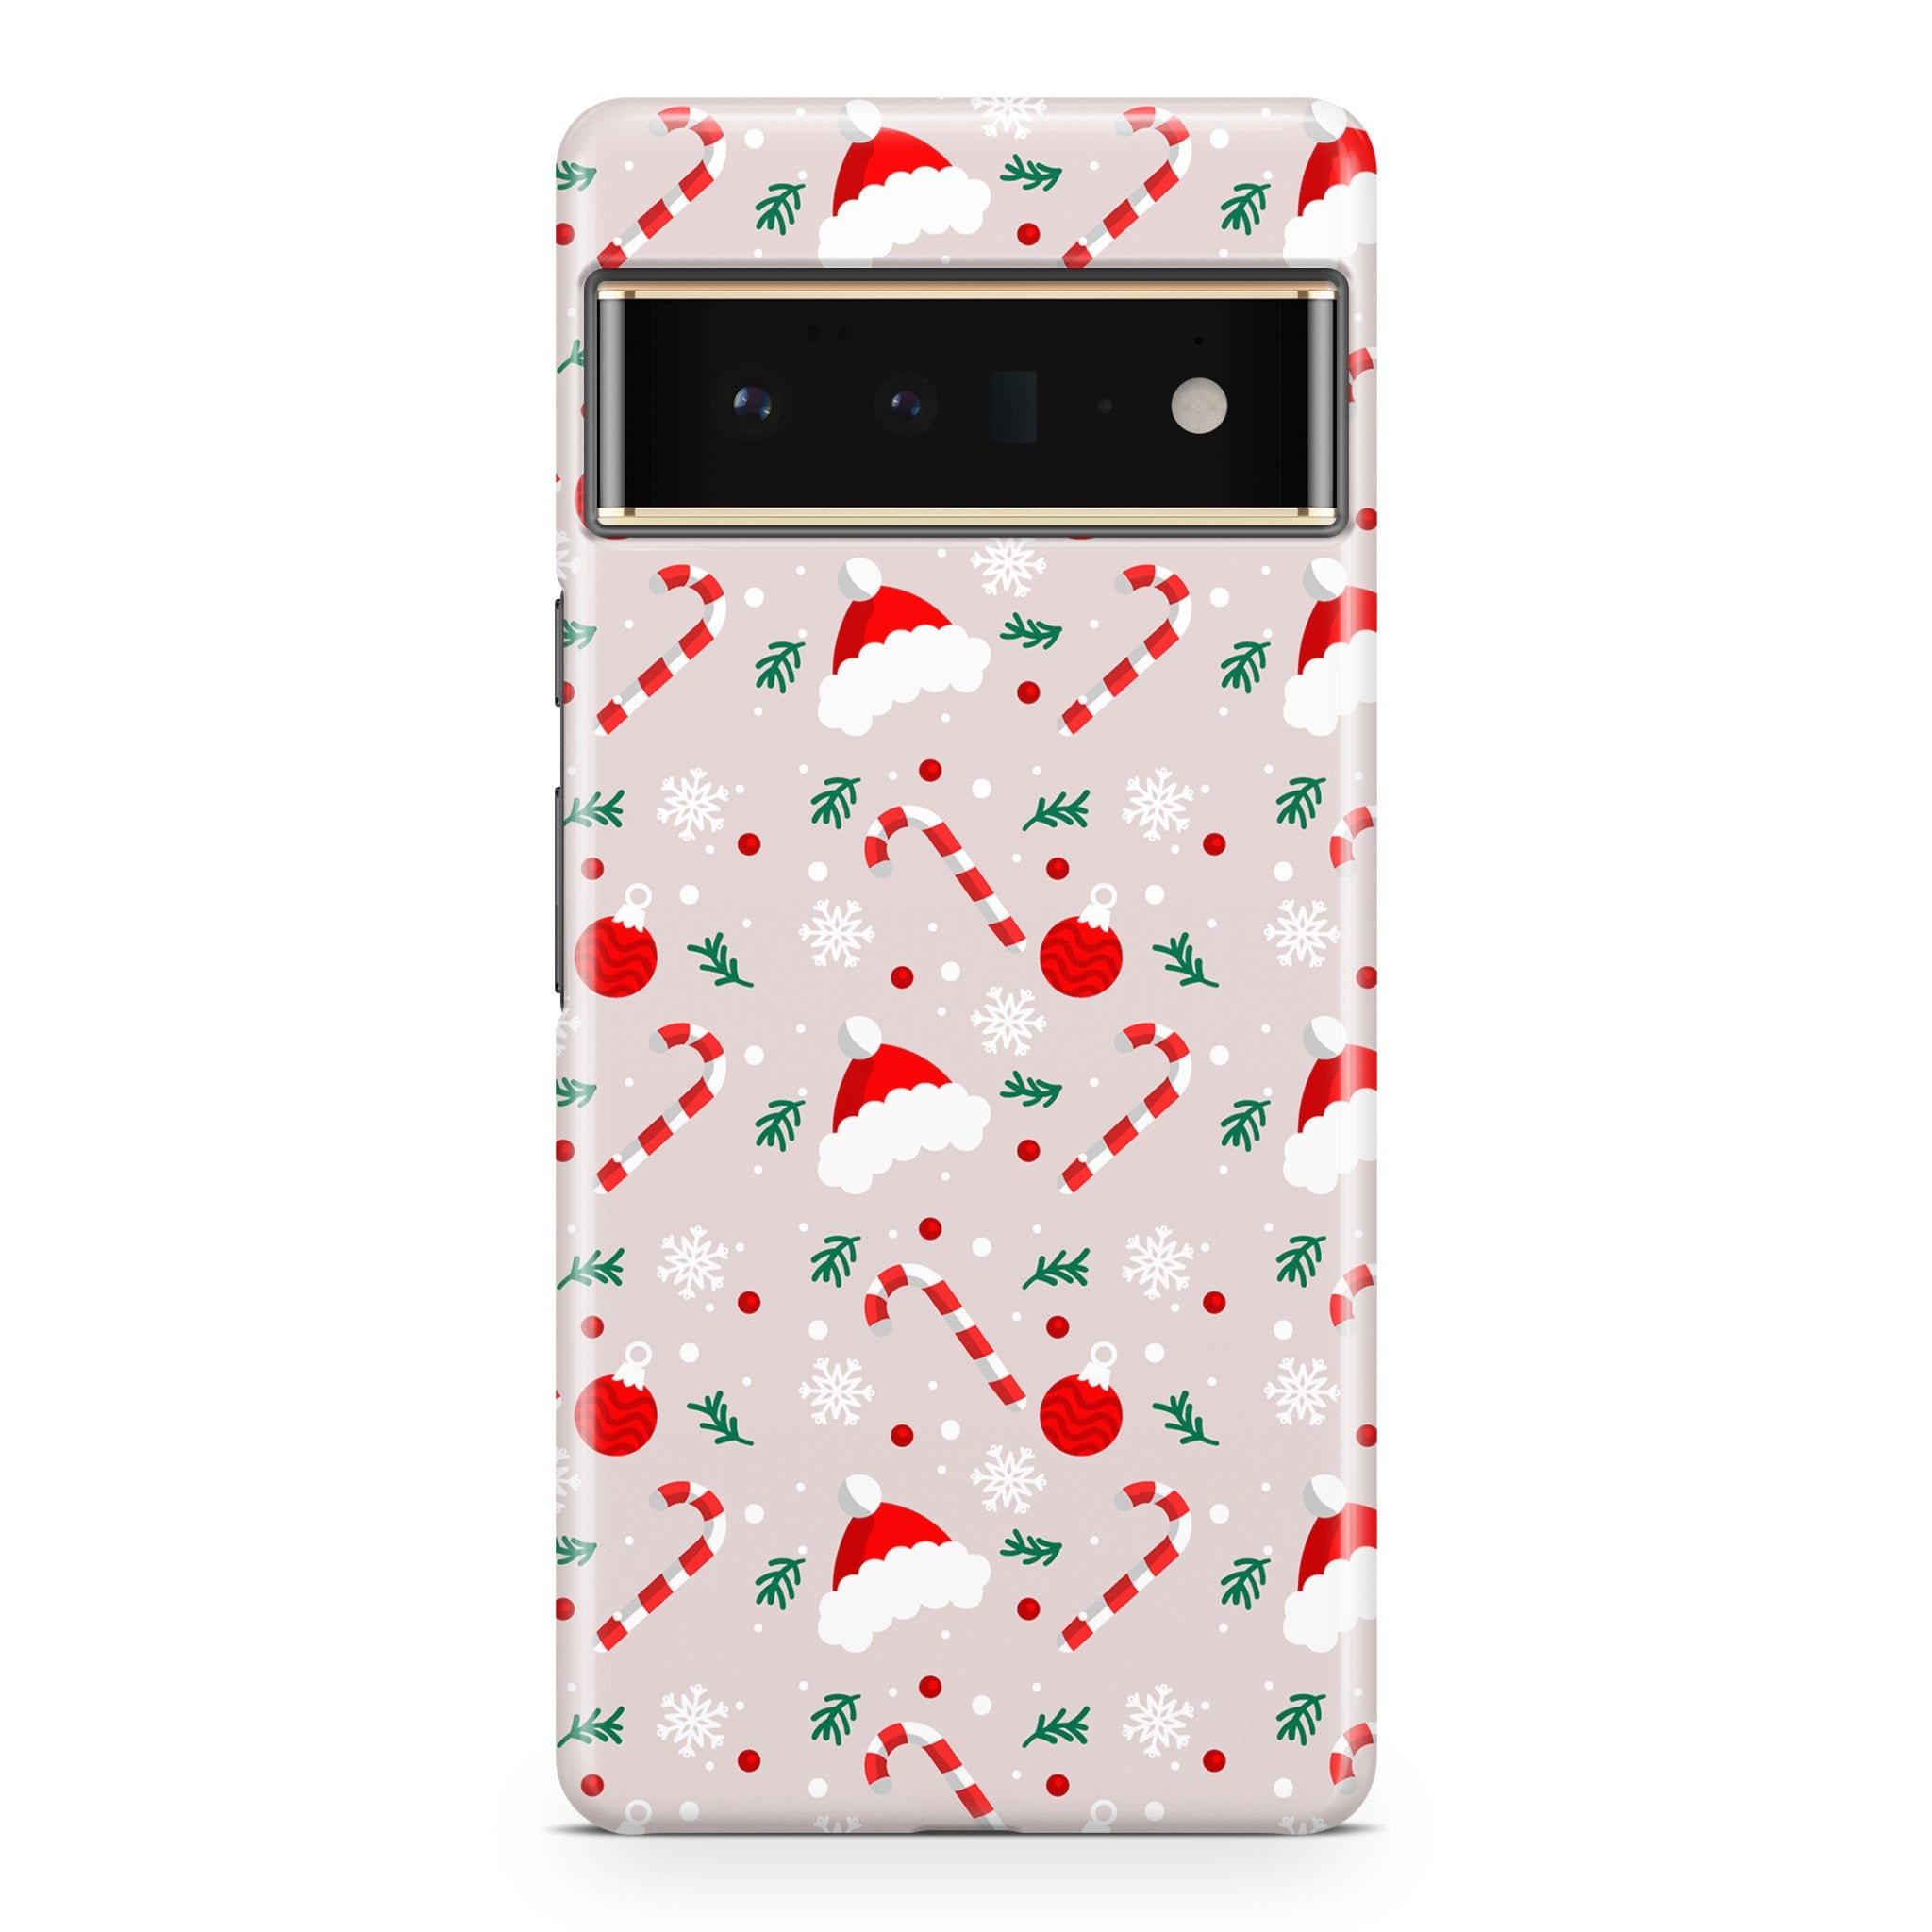 Candy Cane Christmas - Google phone case designs by CaseSwagger